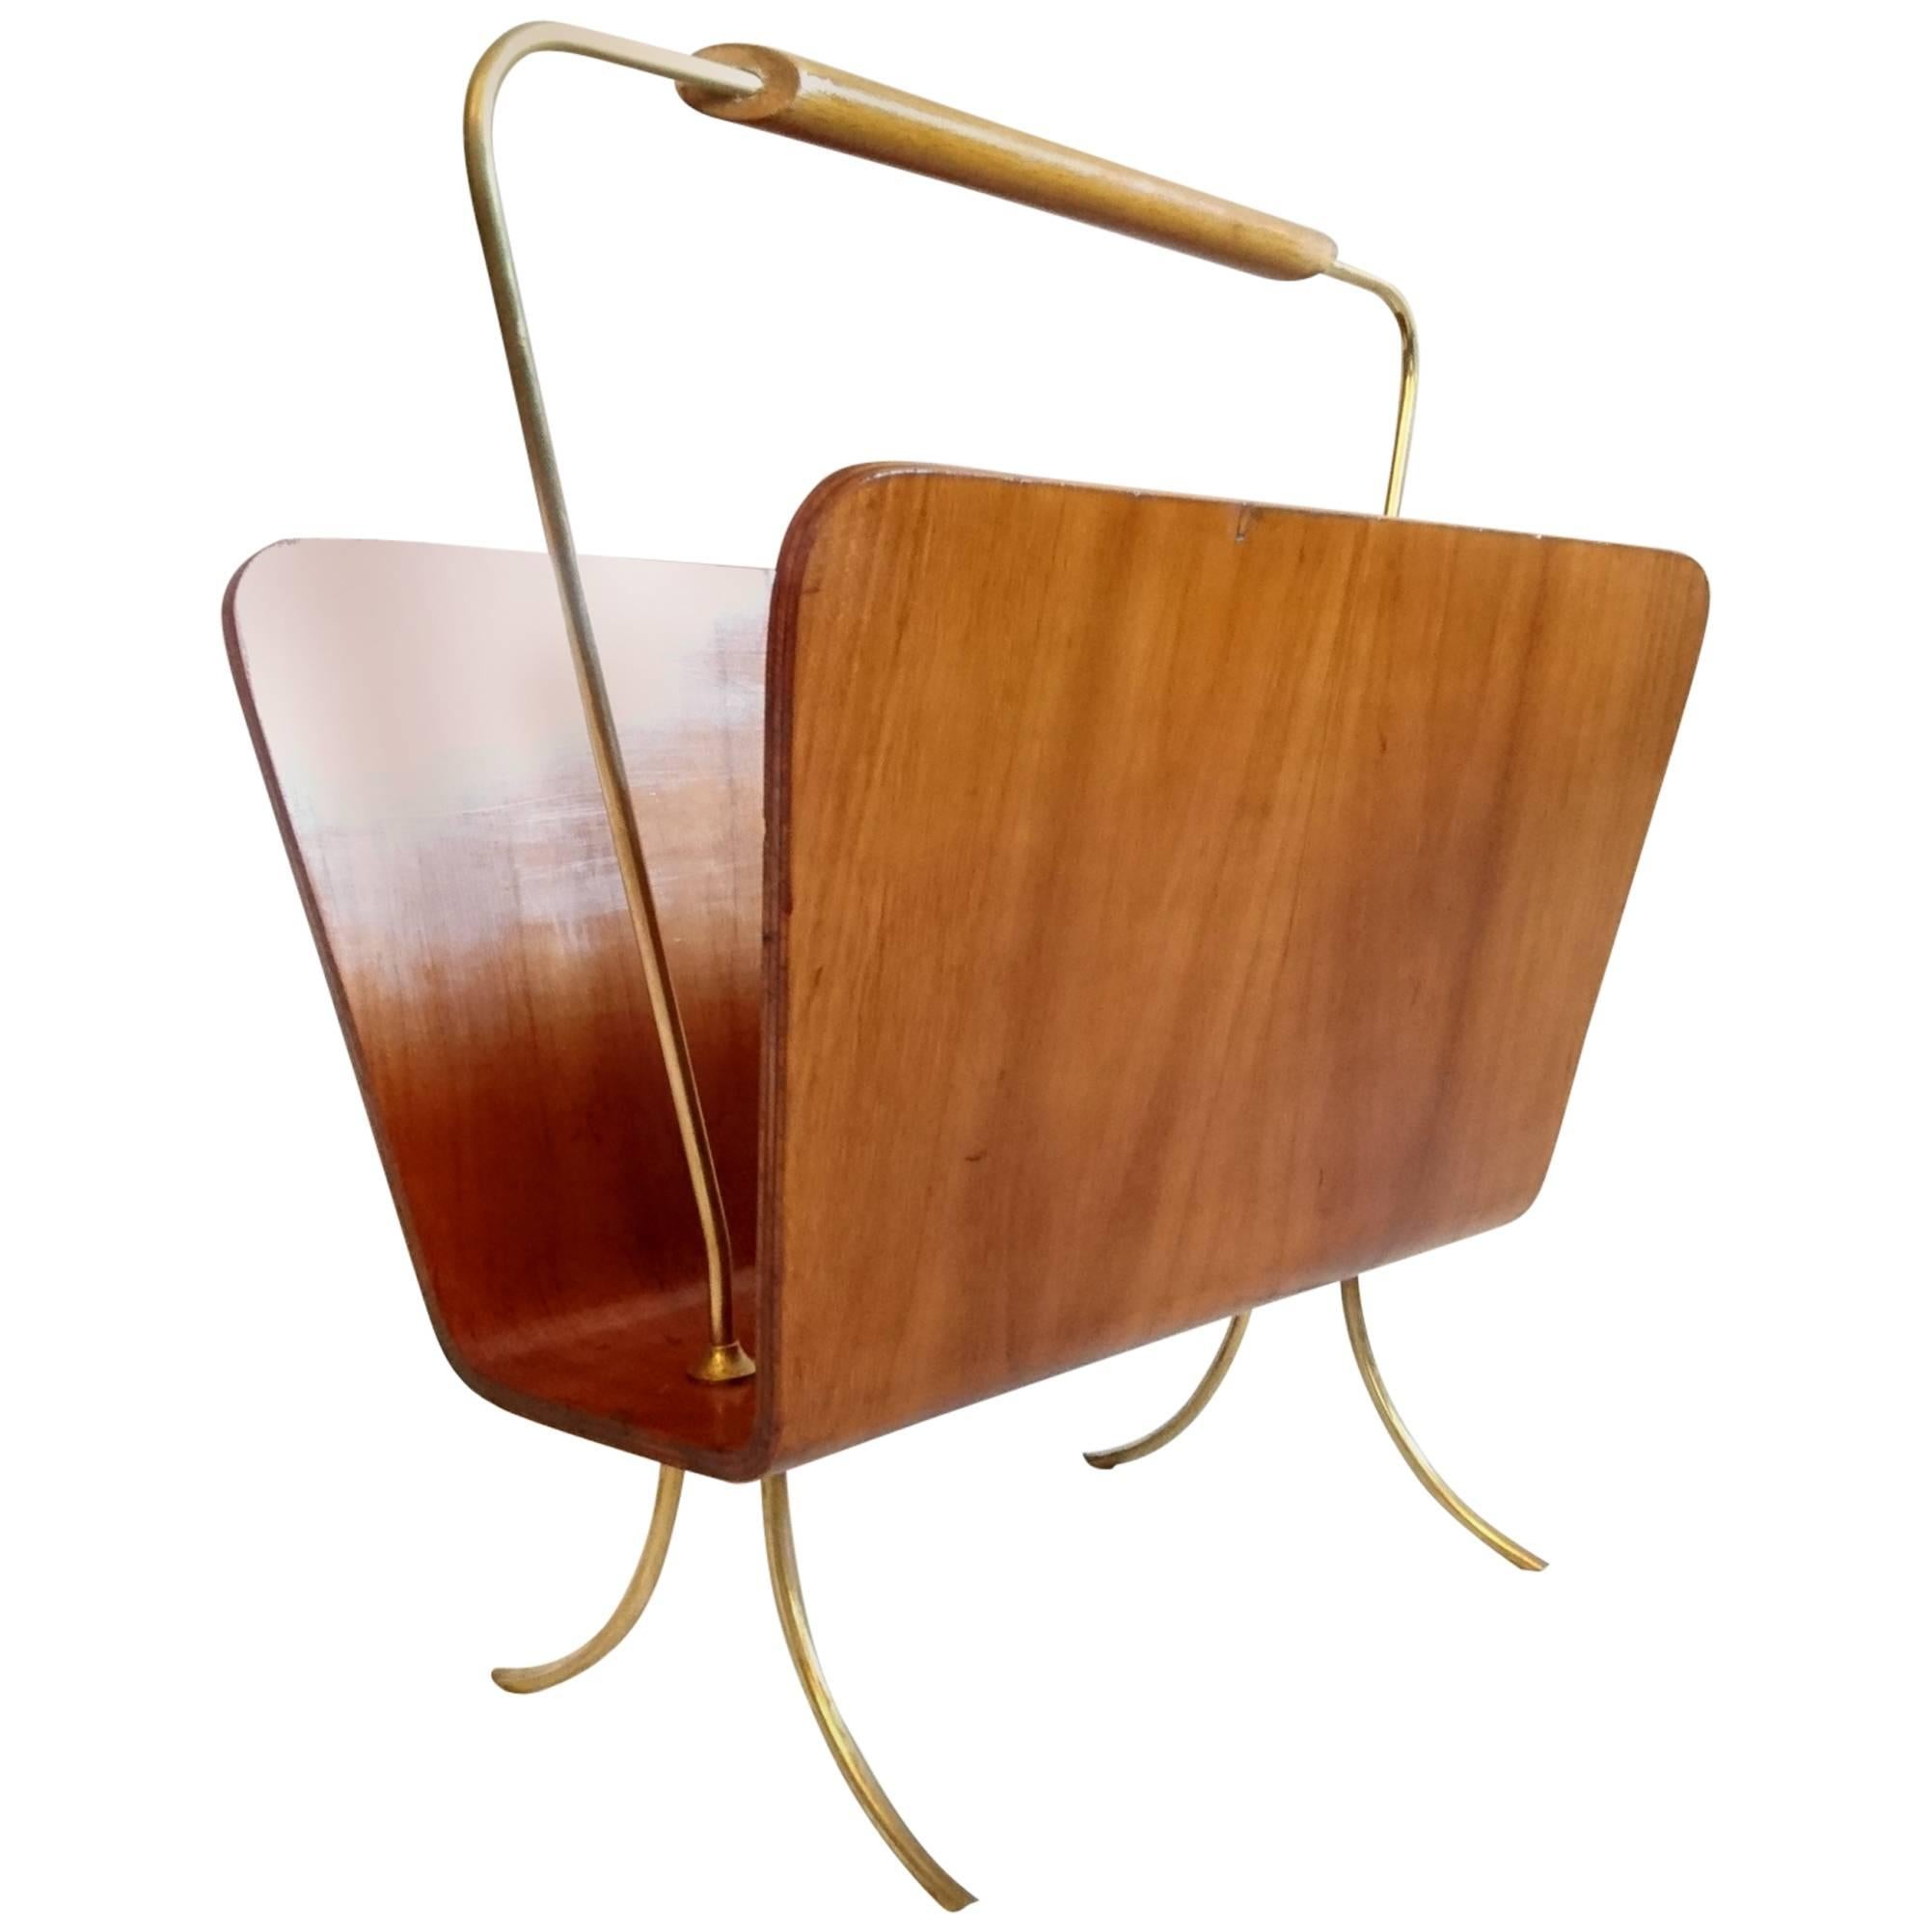 Magazine Rack in Ashwood and Brass, Italy